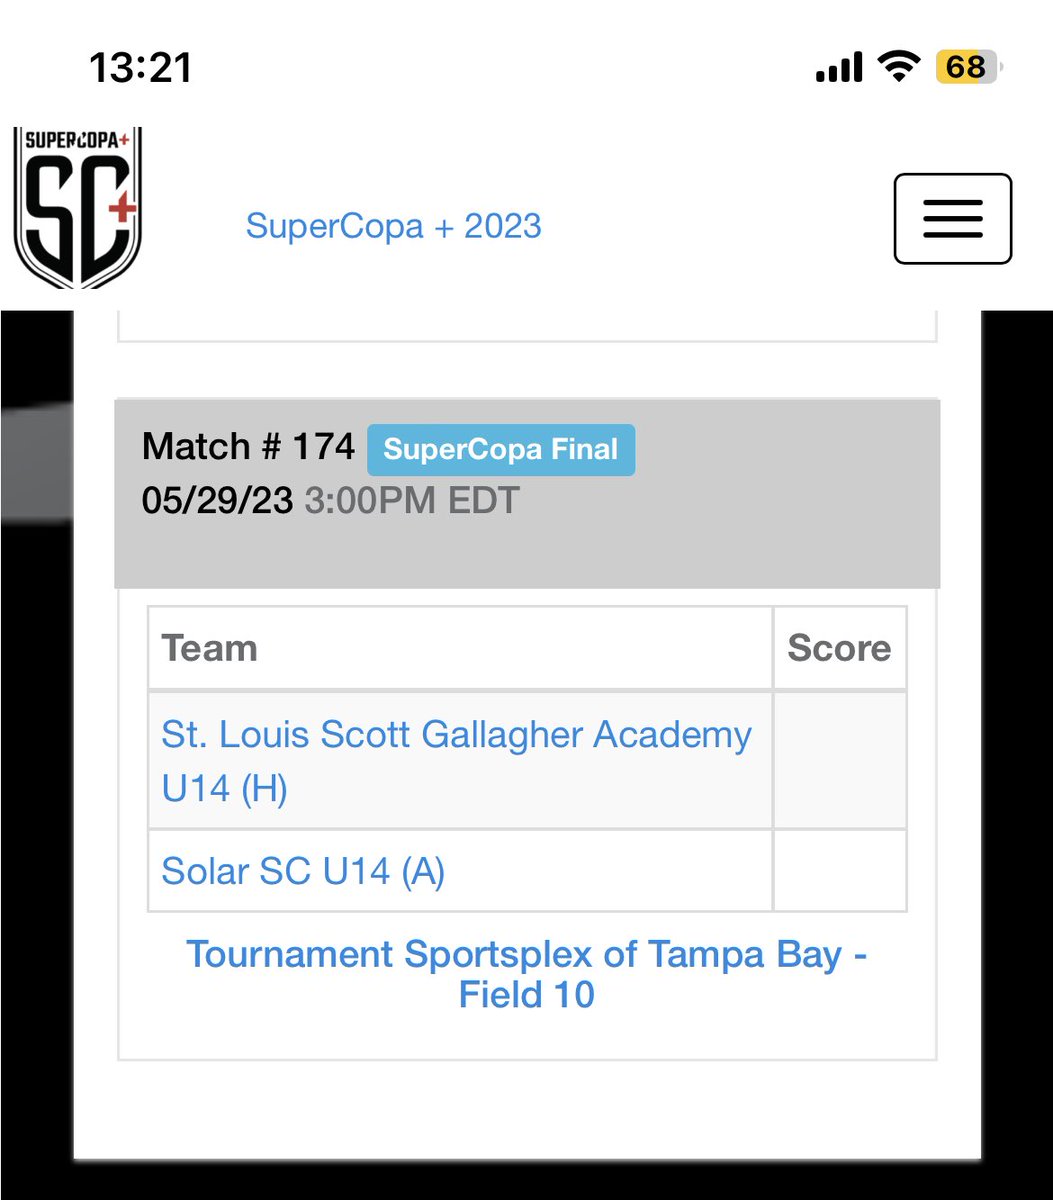 .⁦@SolarSoccerClub⁩ 2009 Academy will play final ⁦@TheSuperCopa⁩+ today at 3:00 pm against St Louis Scott Gallagher. Let’s go Solar! #solarnation #wearesolar #solarproud